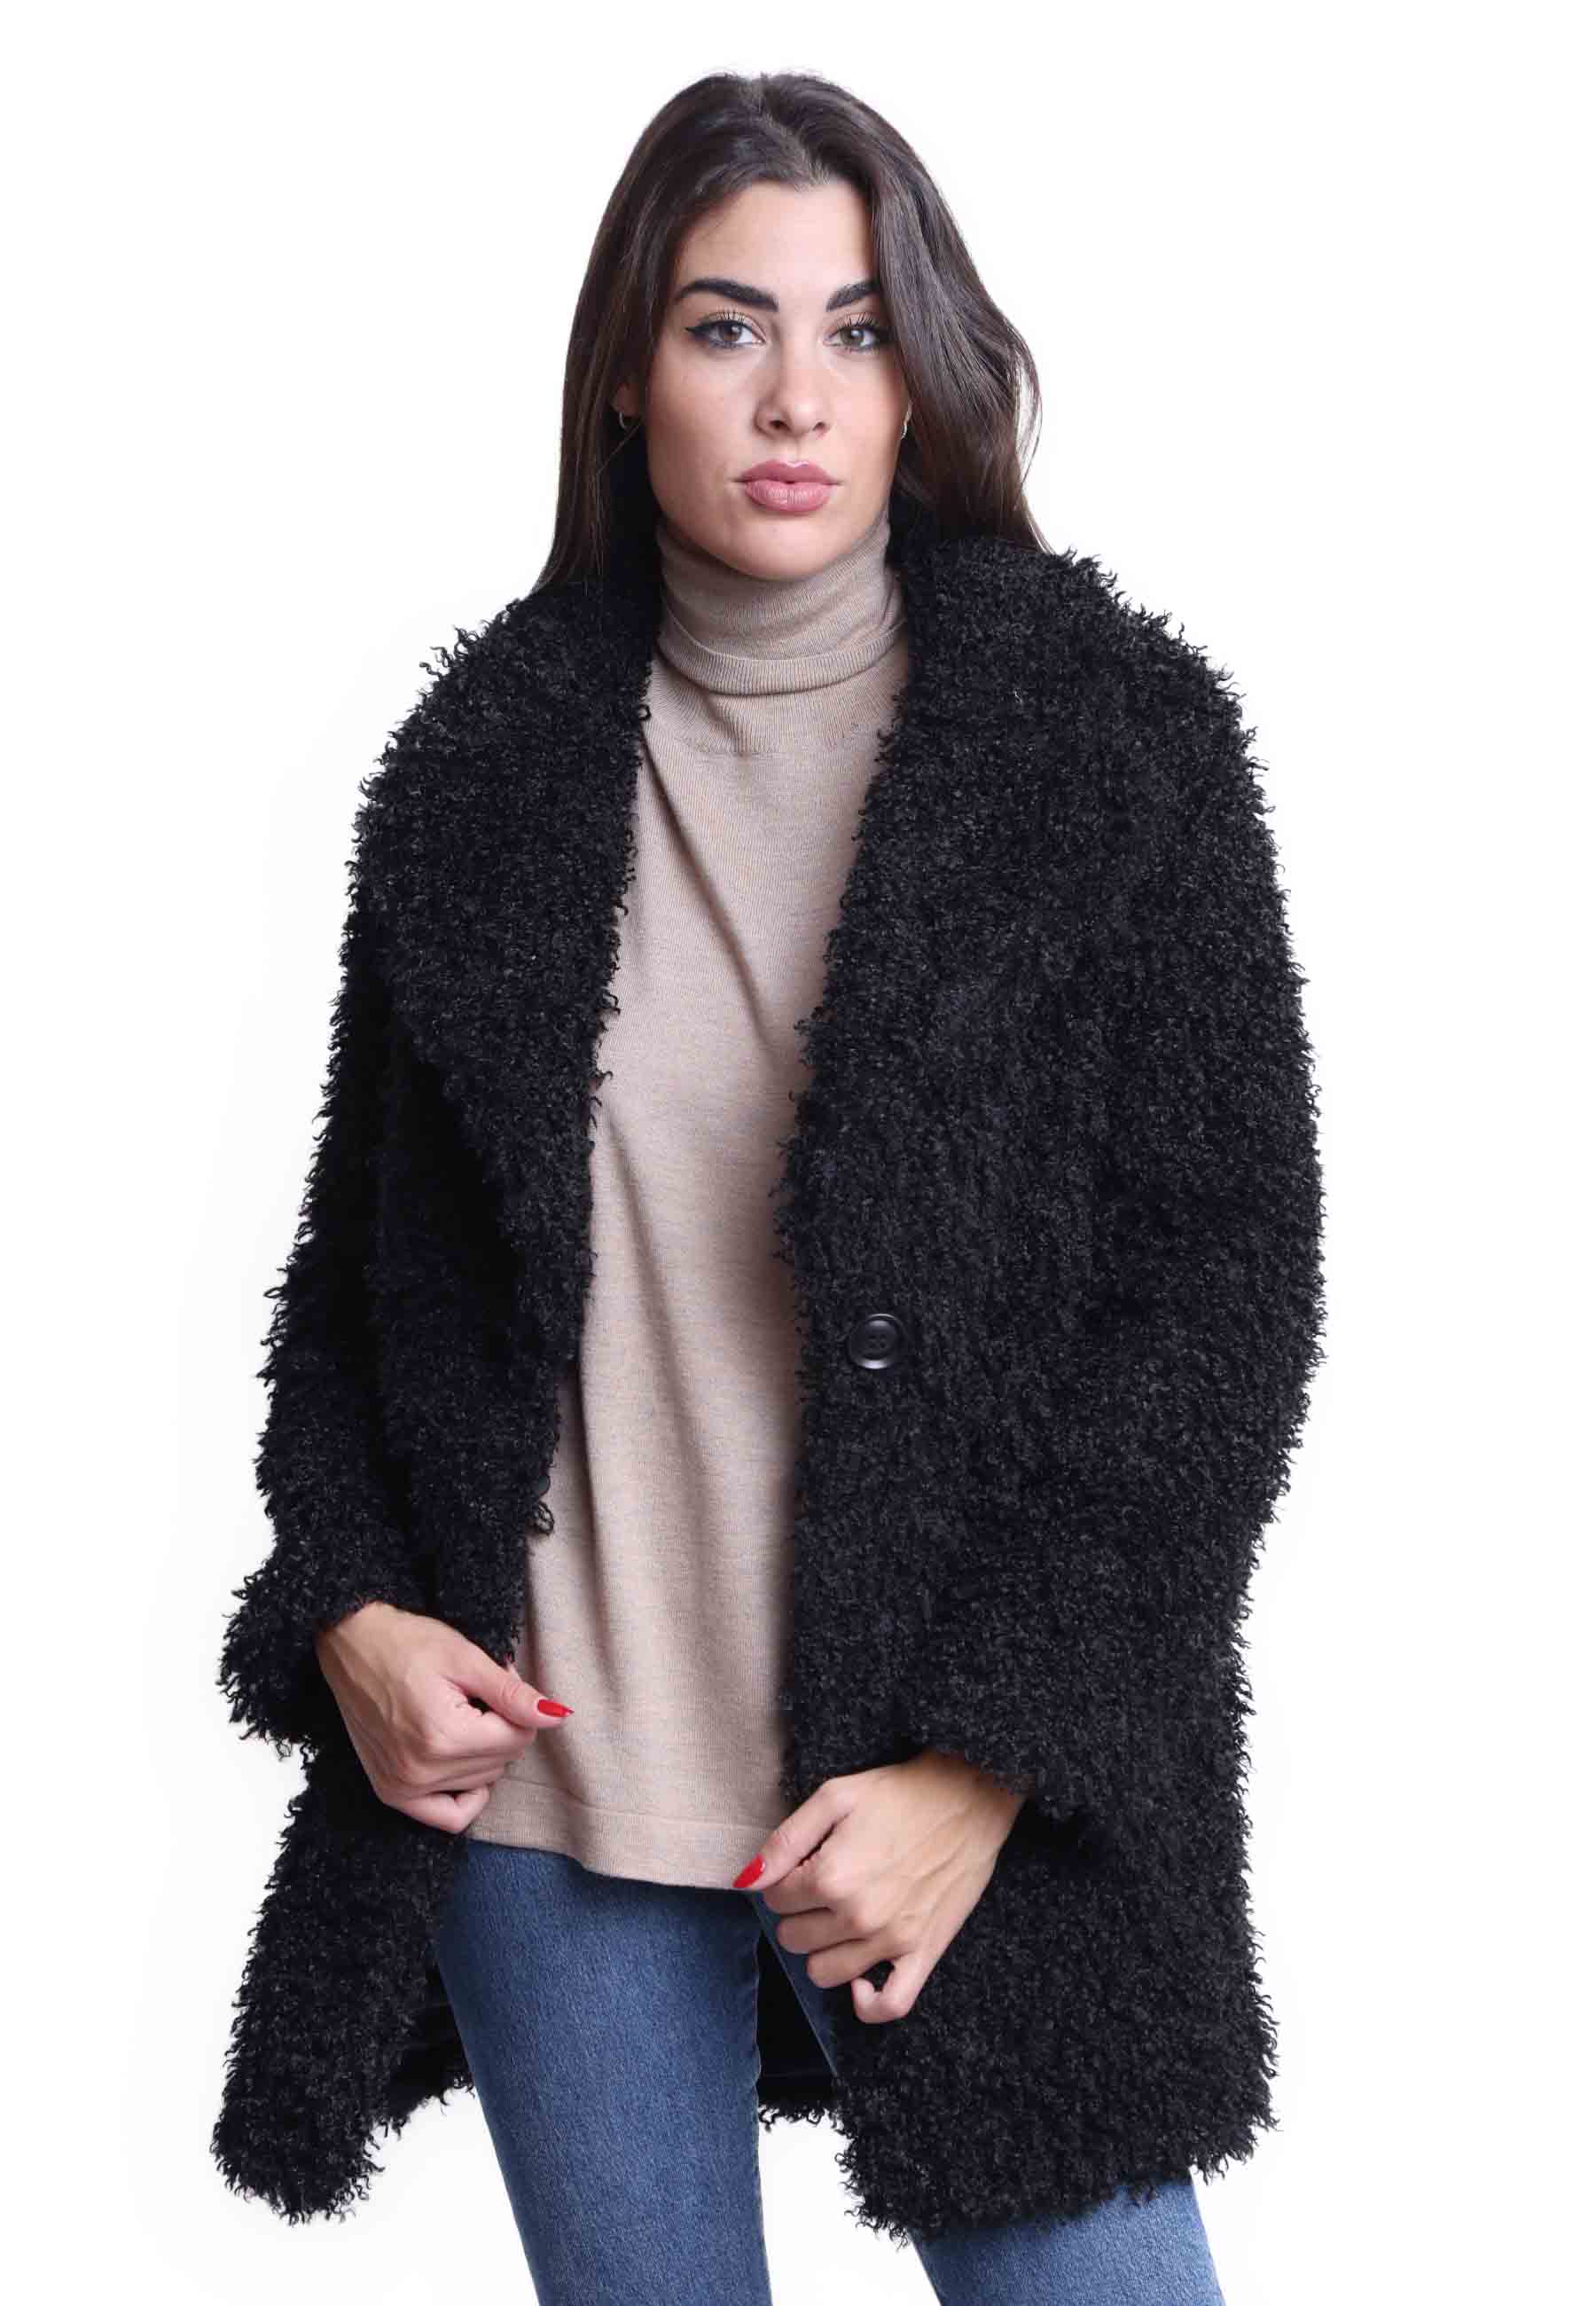 Women's teddy coats in black eco fur with large single-breasted one button